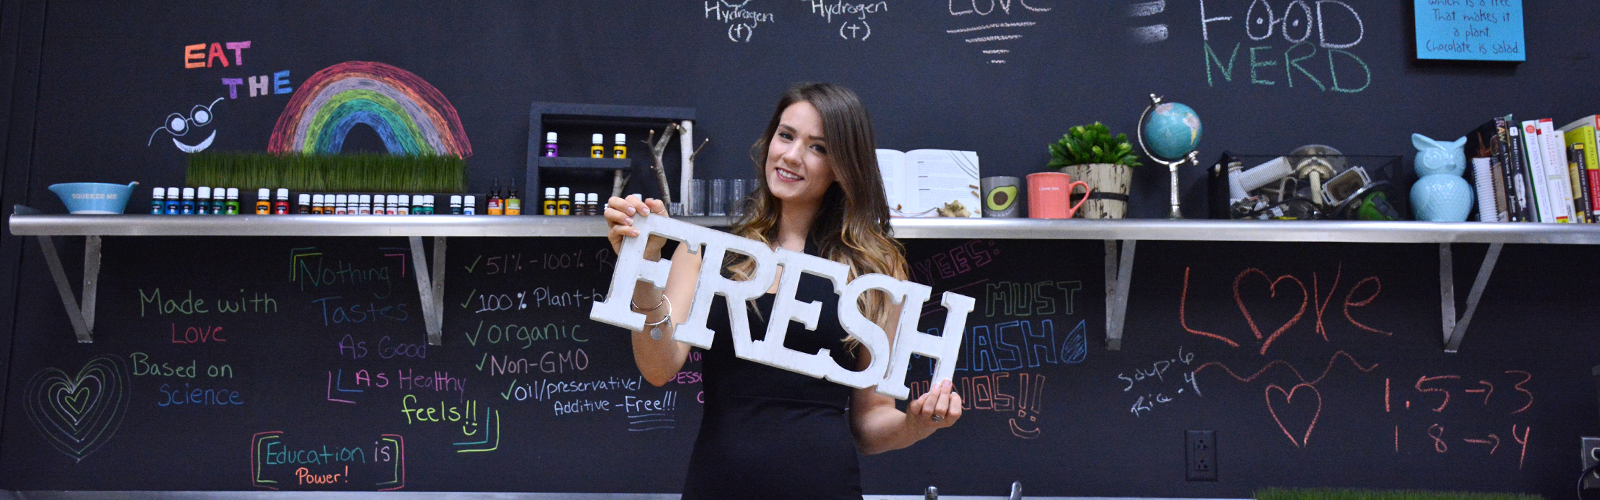 Sharon Cryan, founder and owner of Food Nerd, stands in front of her inspiration board holding an adjective that sums up her product.